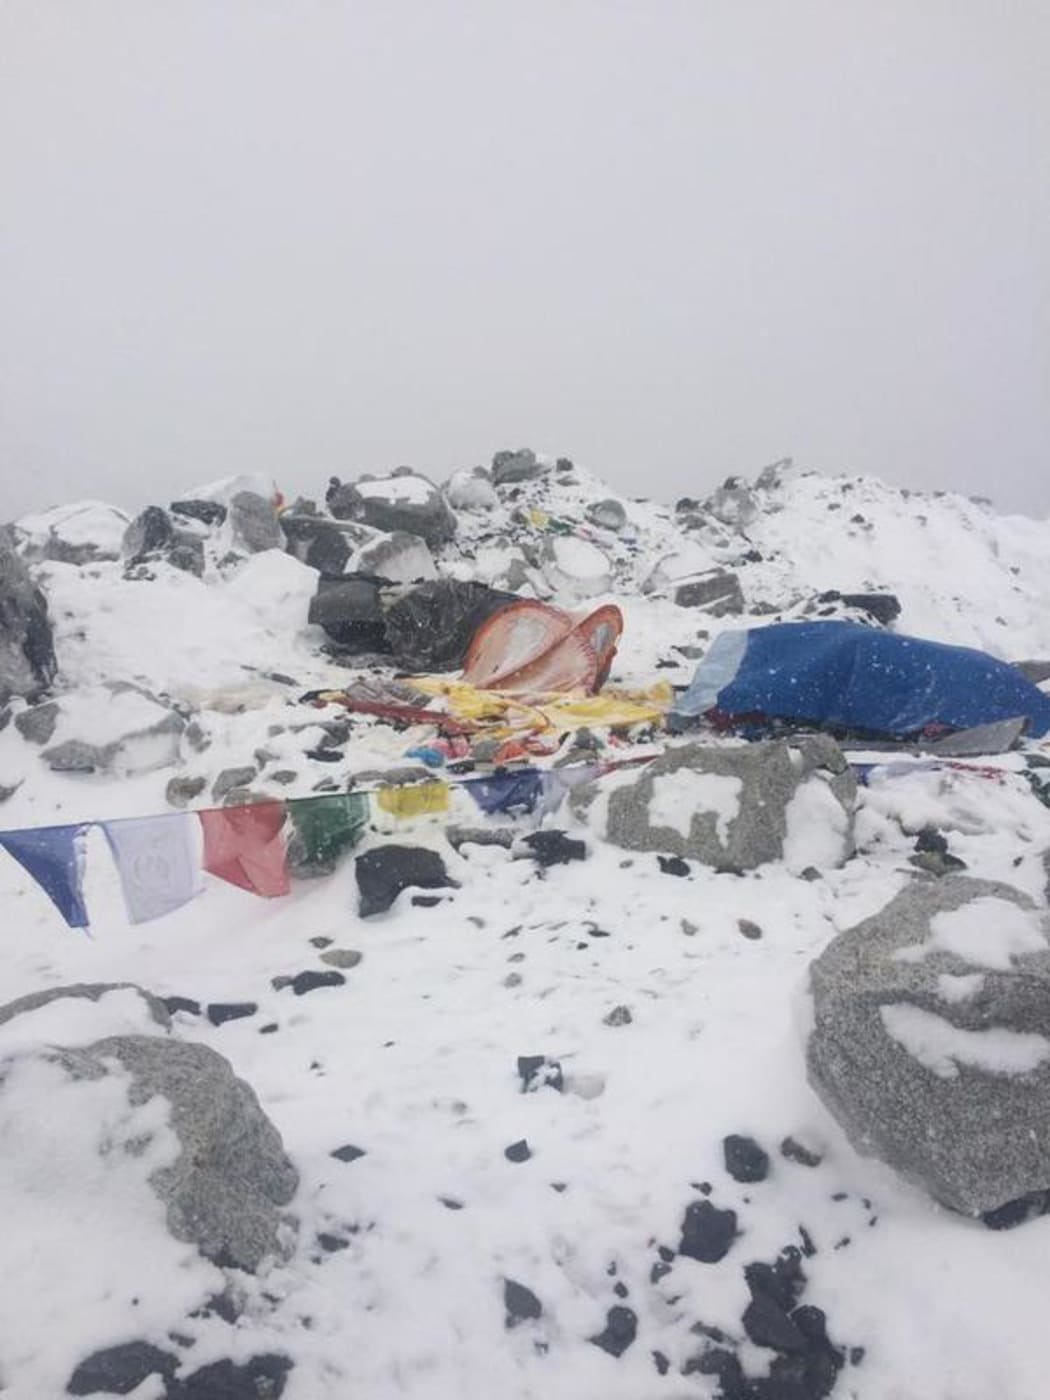 An image posted on Twitter claims to show tents at Everest's Base Camp covered with snow after the earthquake.